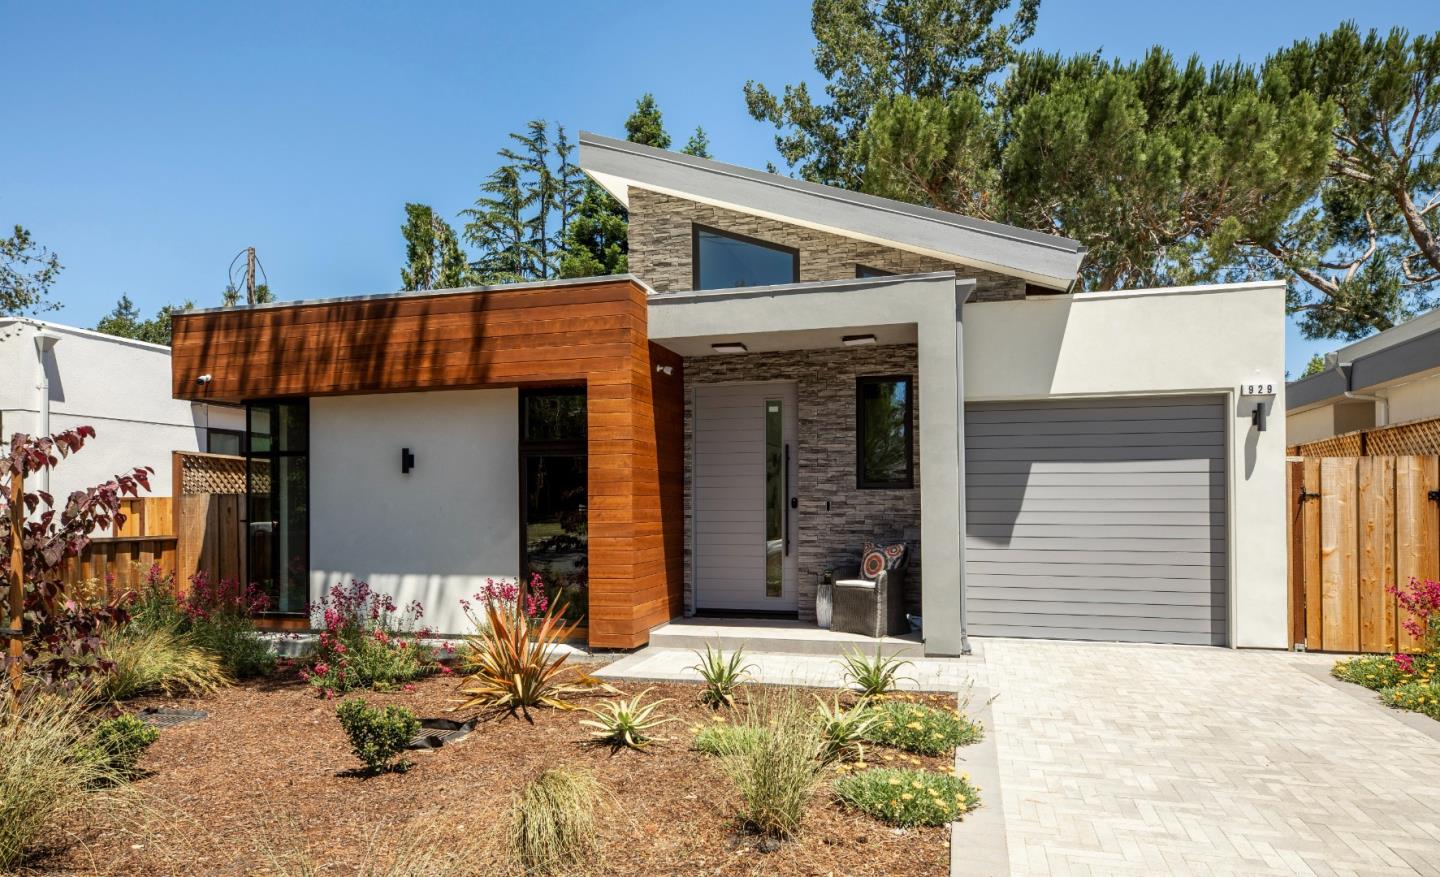 This sleek new build merges contemporary drama with modern comfort and convenience. The entry gallery opens to light-filled interiors with towering ceilings, skylights, and clerestory windows, creating a breezy, indoor-outdoor retreat at the heart of Los Altos. Gathering areas with an inset fireplace offer a folding Centor® glass wall connecting to the patio for versatile living and entertaining. The expansive waterfall island anchors a chefs kitchen fitted with Viatera® Calacatta Sol quartz countertops, custom cabinetry, and Thermador® smart appliances. Each level offers a laundry center and luxurious primary suite, and the lower level displays a flexible family room. Enjoy European white oak floors, surround sound, Da Vinci Marble® and heated floors for bathrooms, and smart features throughout. This home is nestled along an impasse street lined with recent builds, showcasing the high desirability of this setting.